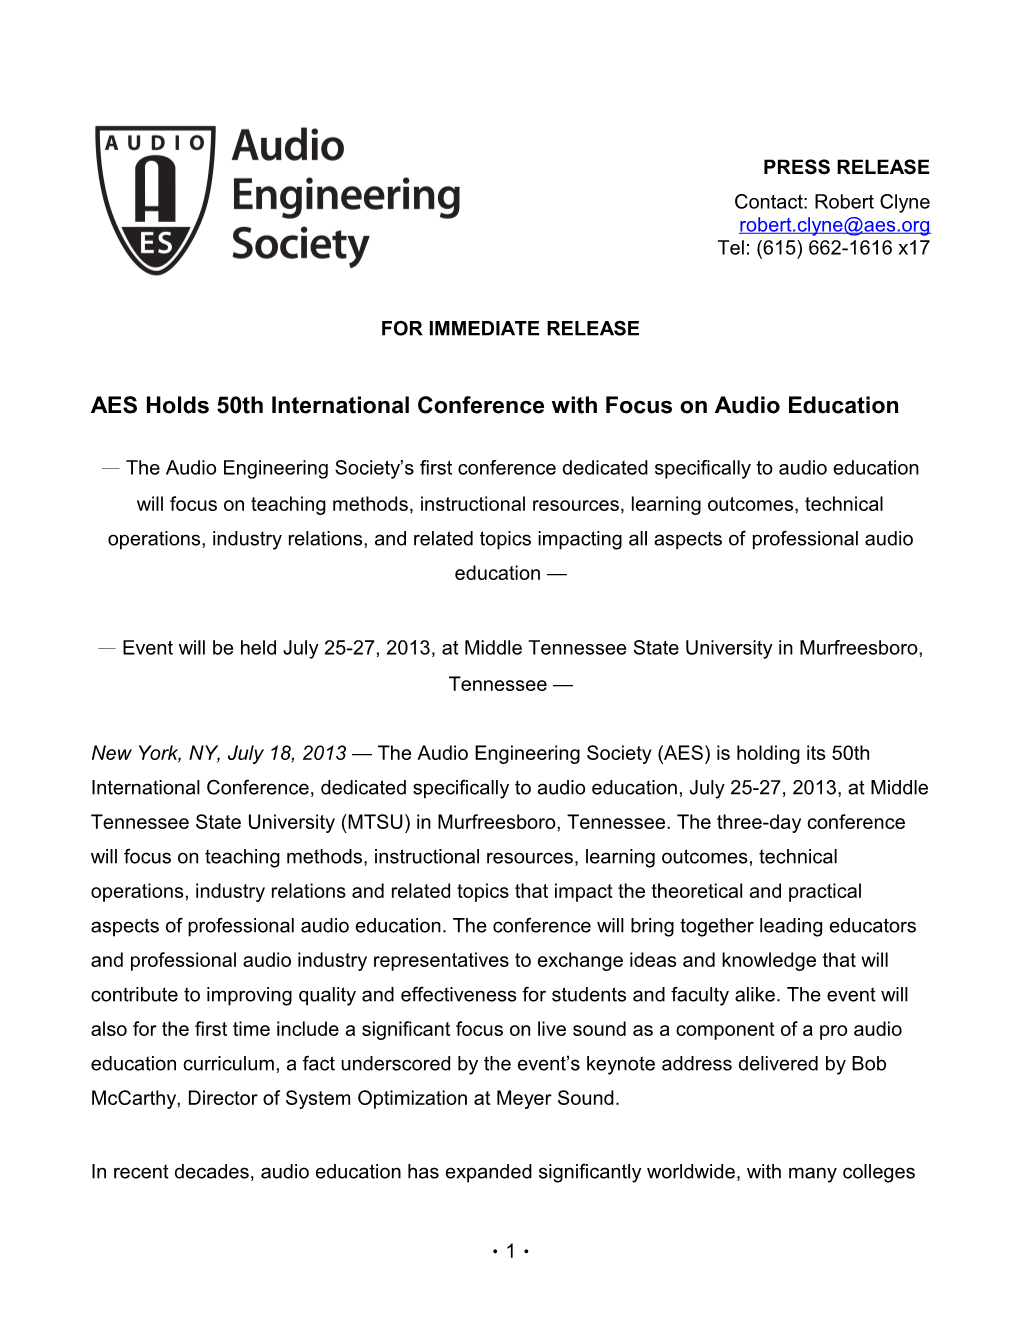 AES Holds 50Th International Conference with Focus on Audio Education